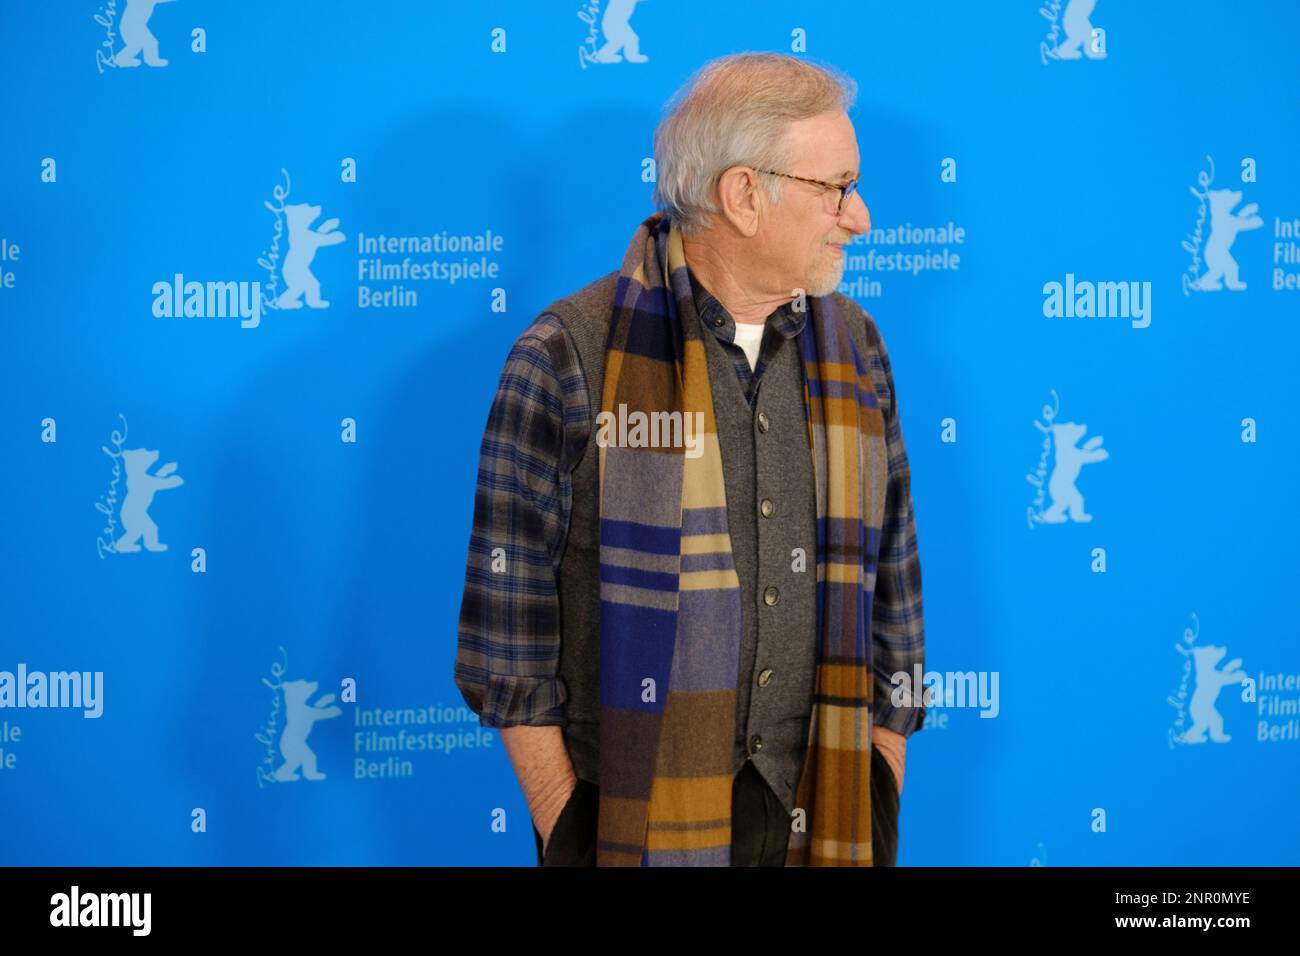 Steven Spielberg pose for a photo during the 73rd Berlinale International Film Festival Berlin at Grand Hyatt Hotel in Berlin, Germany on February 21, Stock Photo